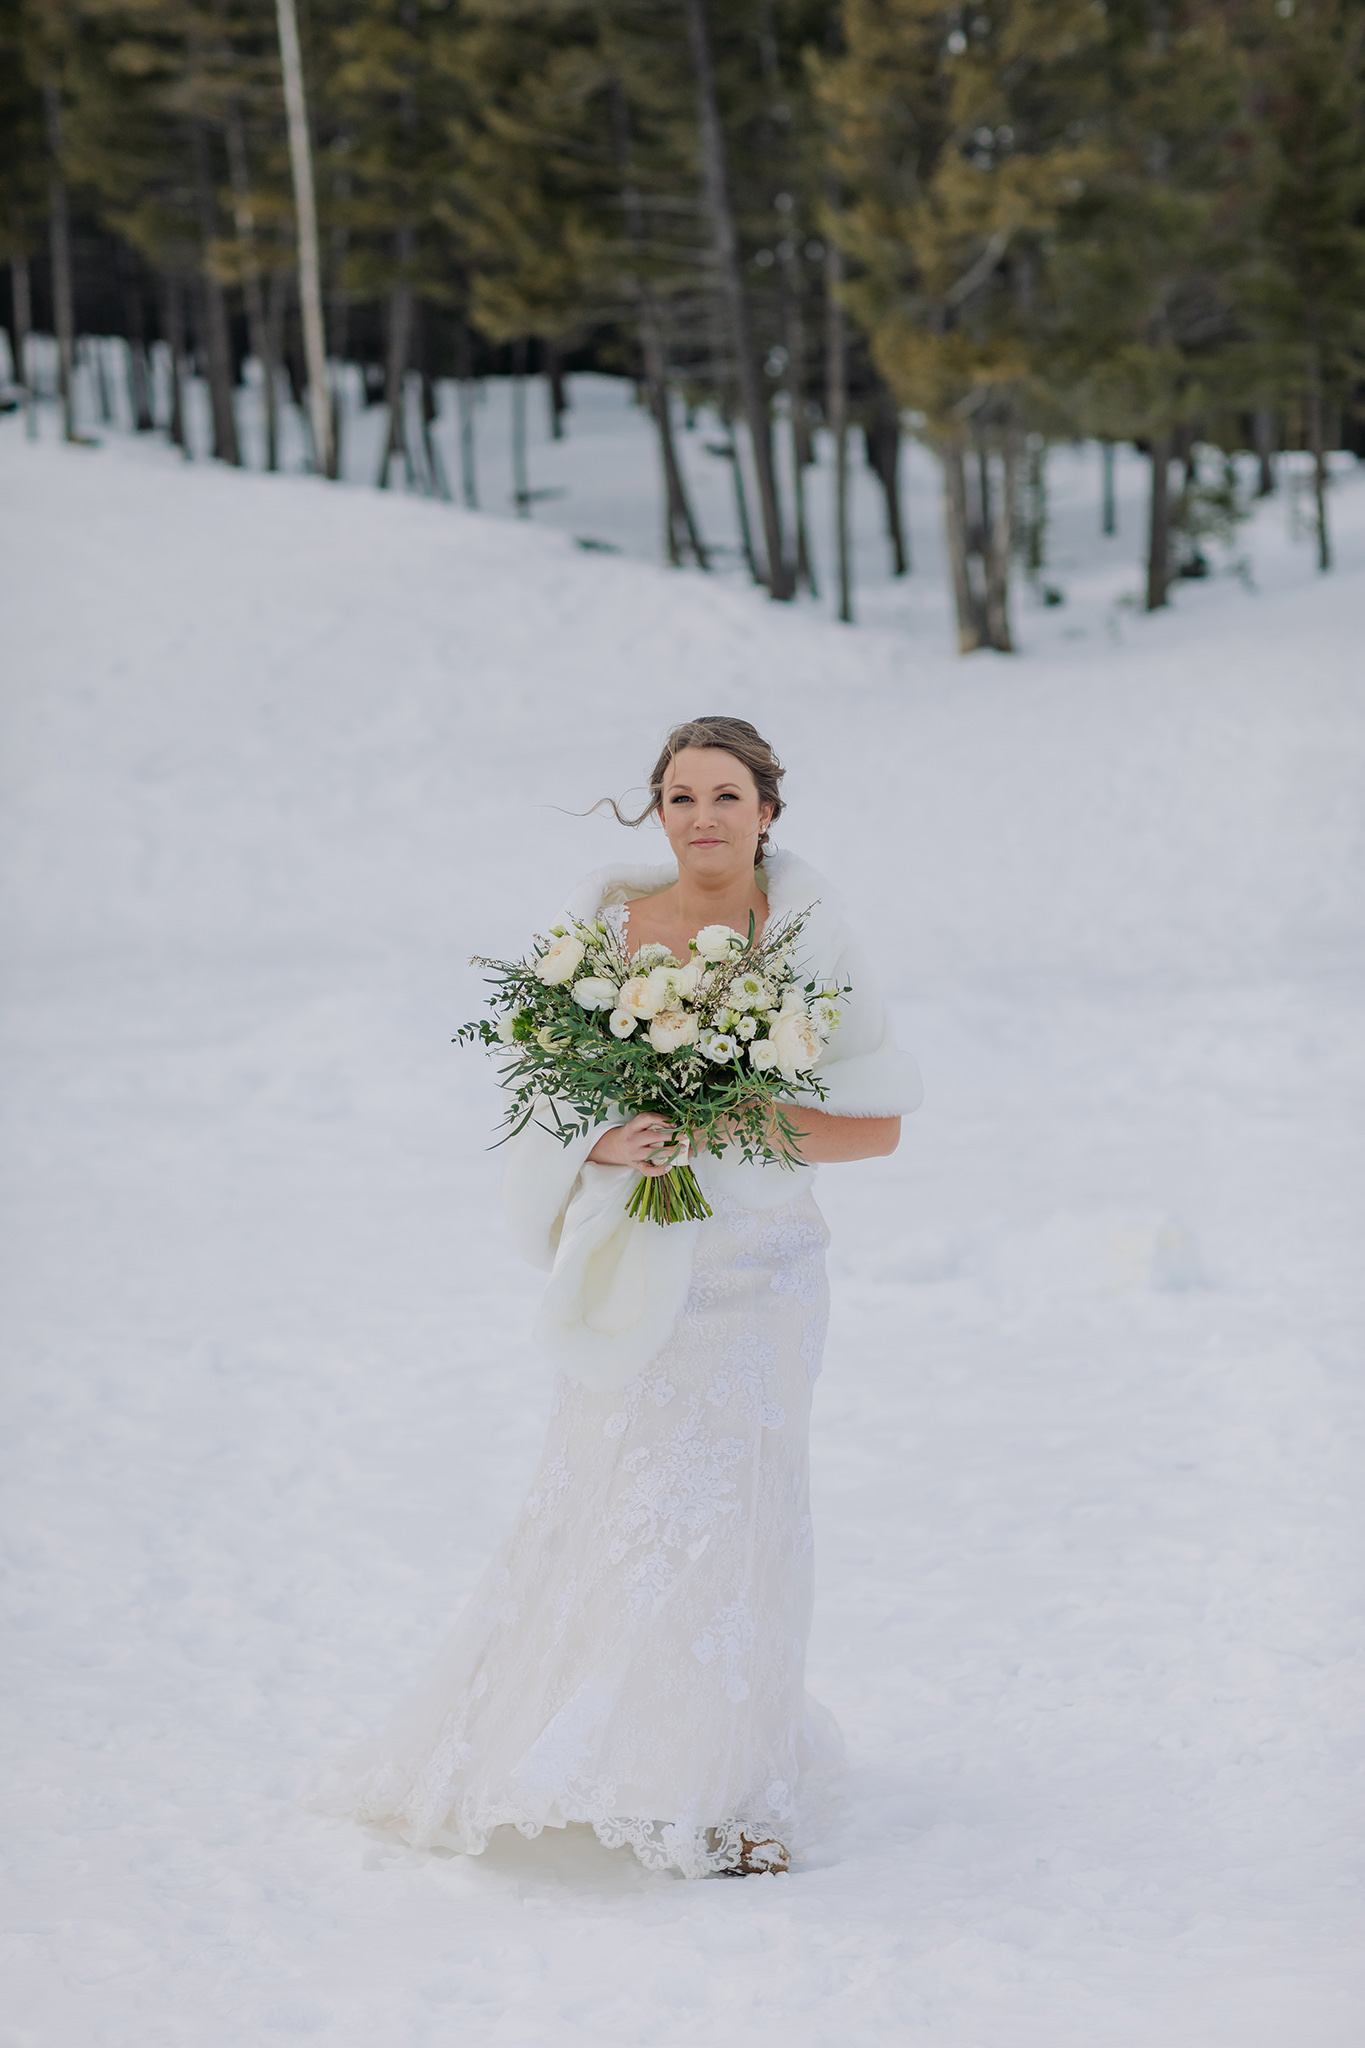 Tunnel Mountain Reservoir bride groom first look in Banff National Park on wedding day. Winter mountain elopement photos